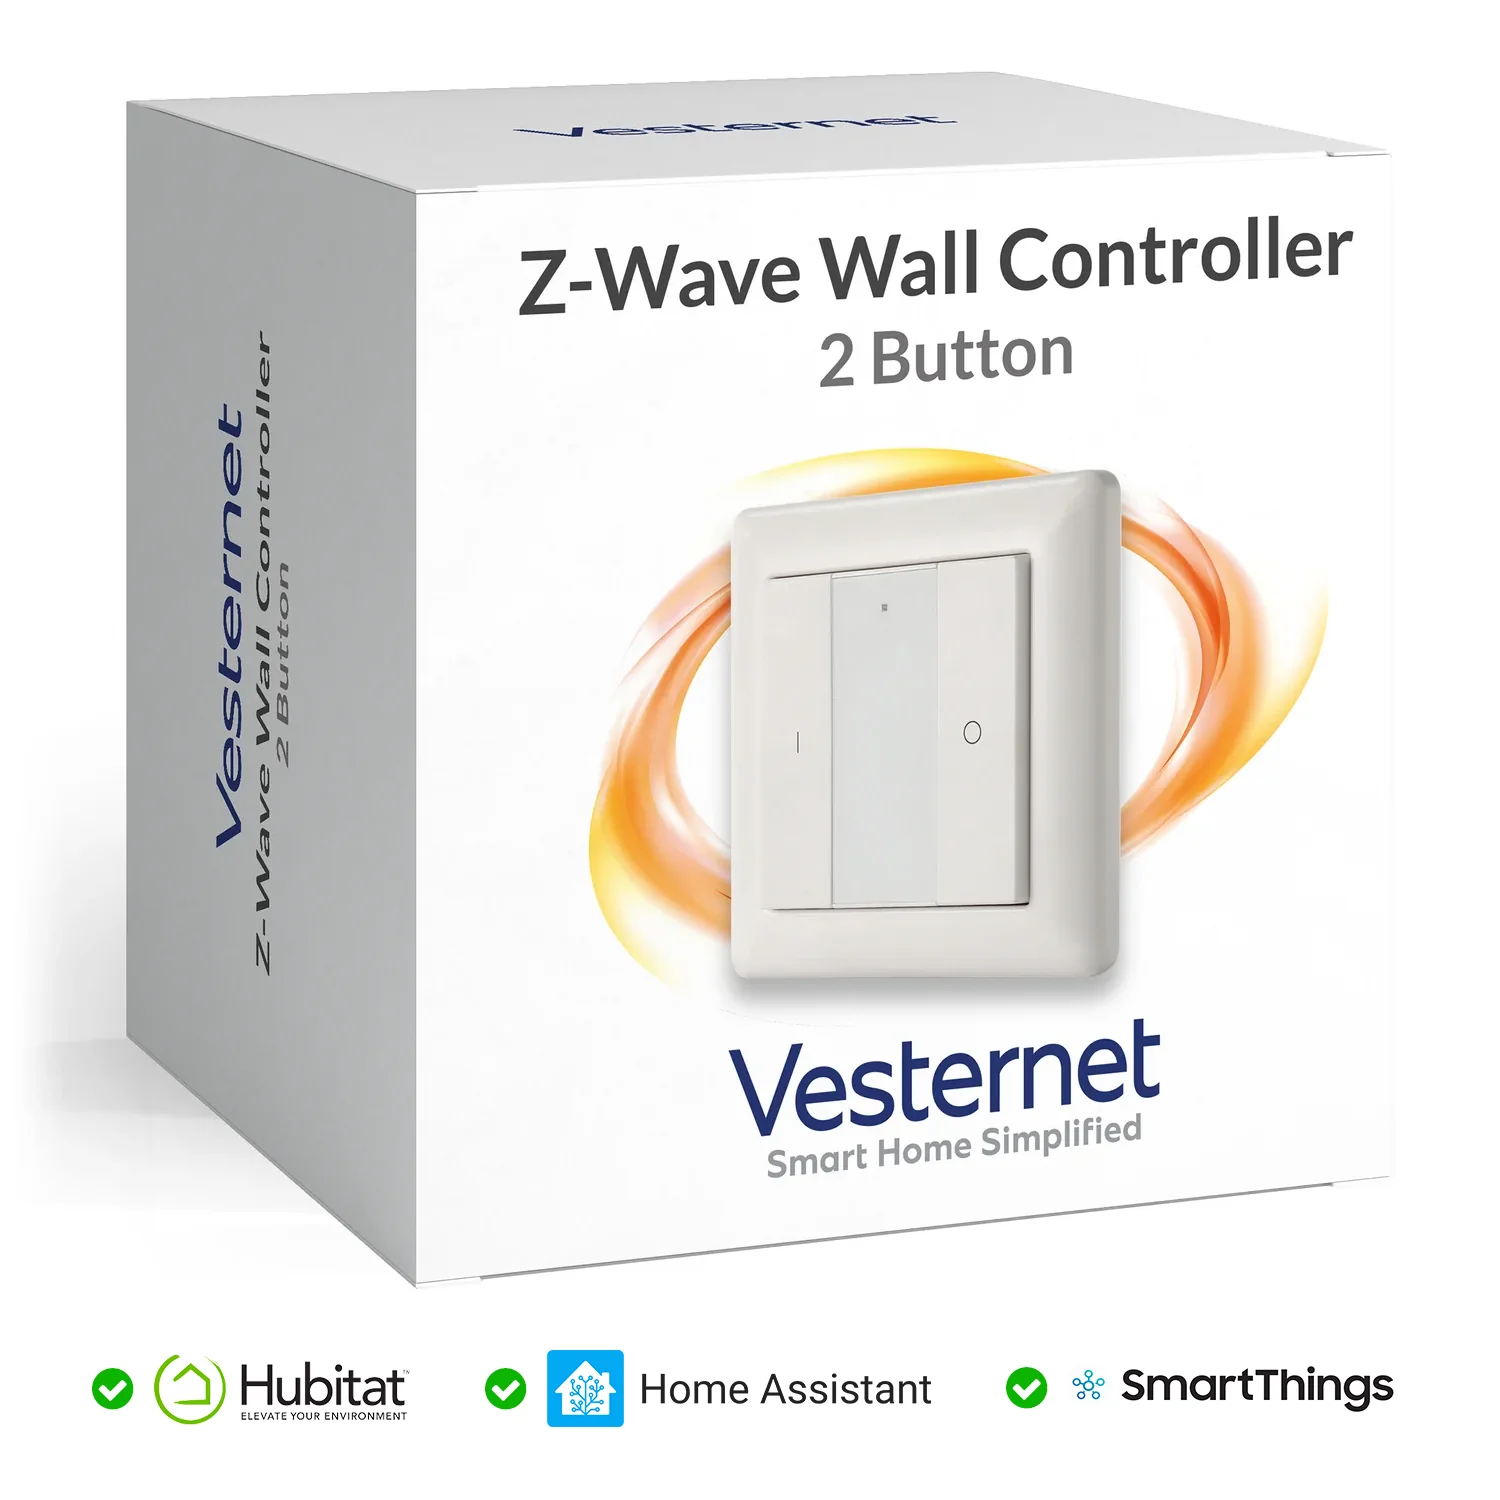 Is this device compatible with my Z-Wave Controller?